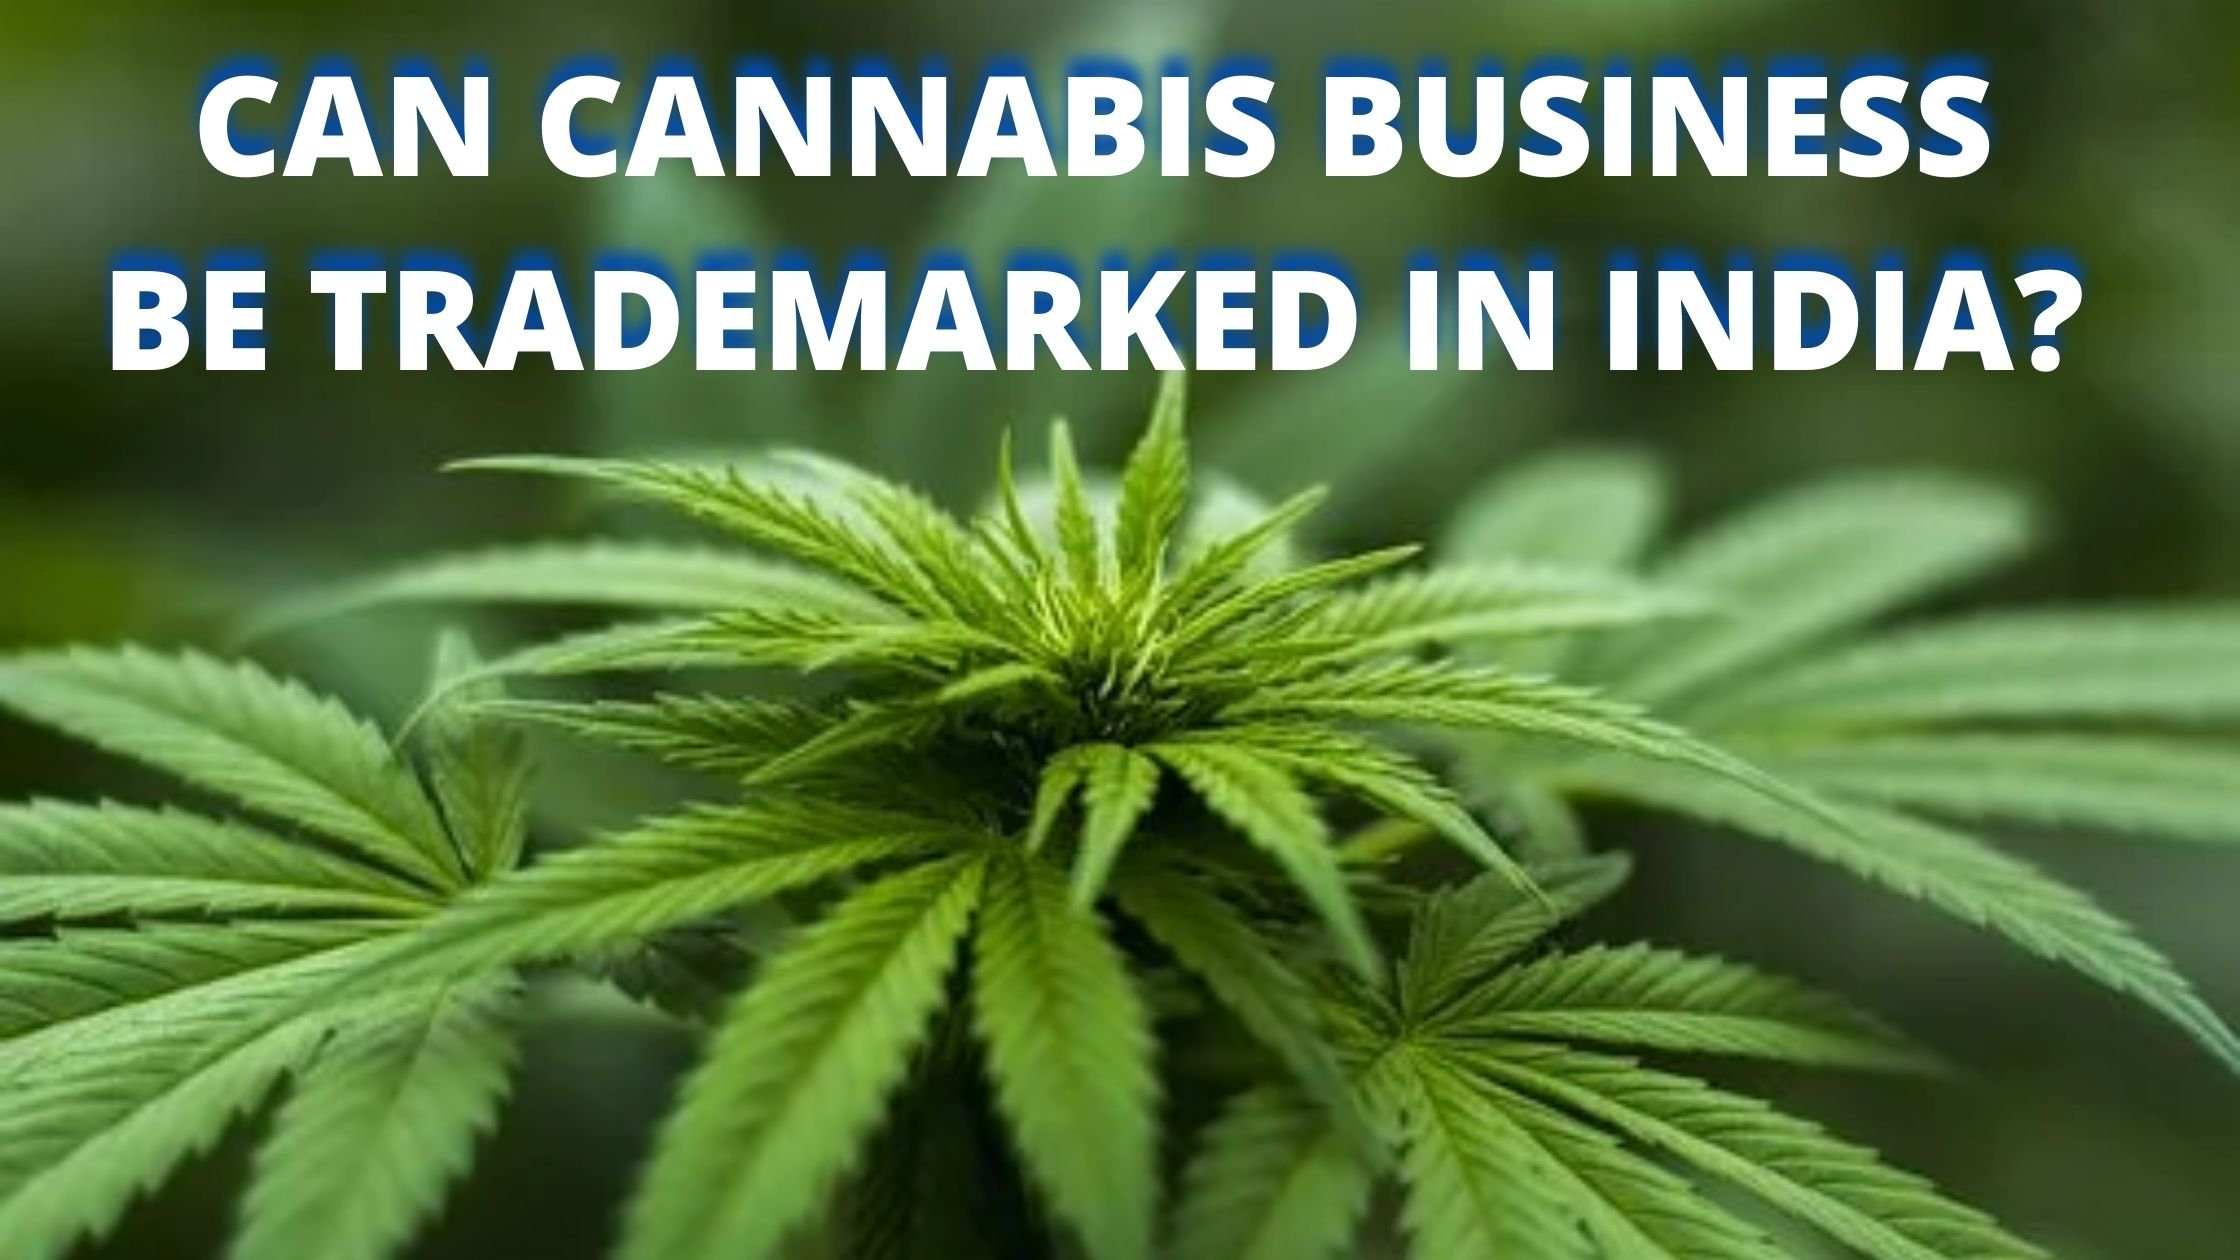 CAN CANNABIS BUSINESS BE TRADEMARKED IN INDIA?